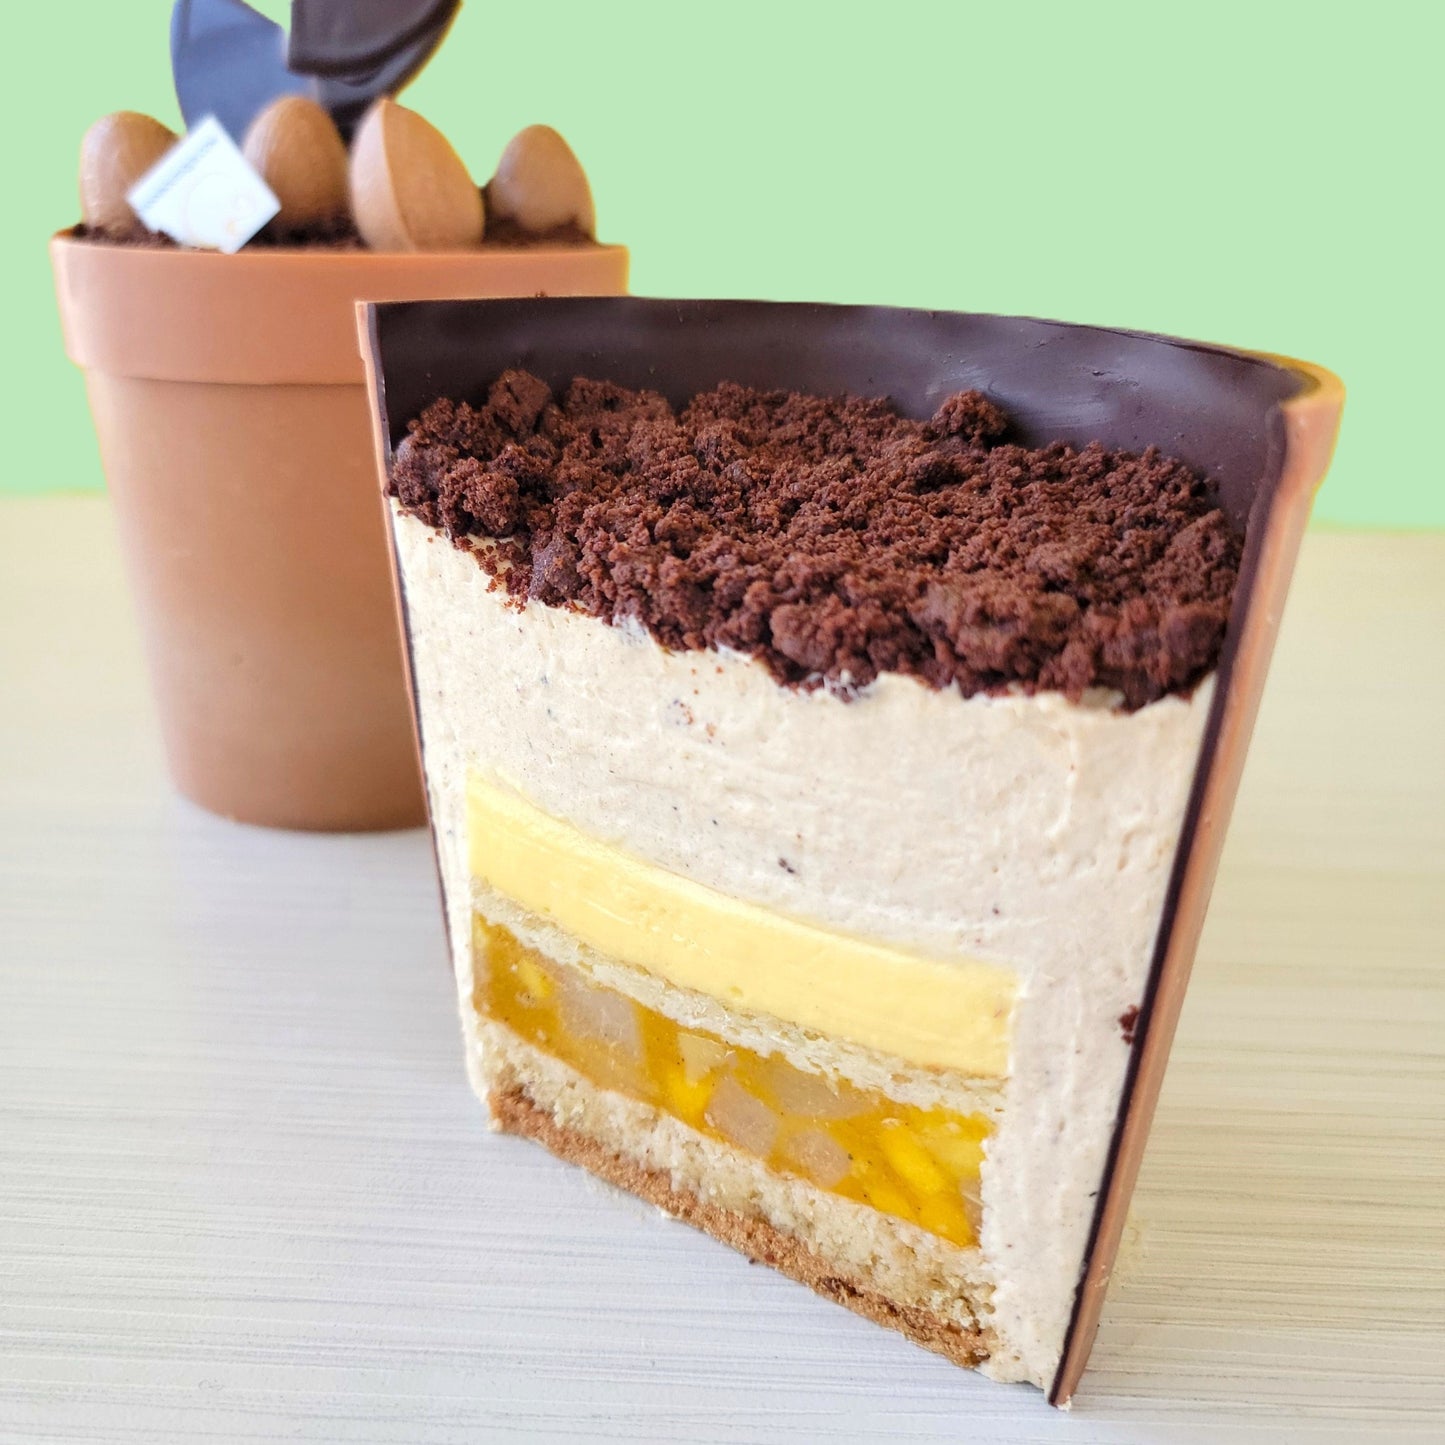 Meet Marguerite & Marge, springing into our menu for Easter! Cake description: Passion fruit cremeux, joconde biscuit, pear & Speculoos mousse, mango & pear, vanilla infused compote, light coconut biscuit on a citrus crumble.  Marguerite is great for 4 to 6 people & Marge is an individual cake.